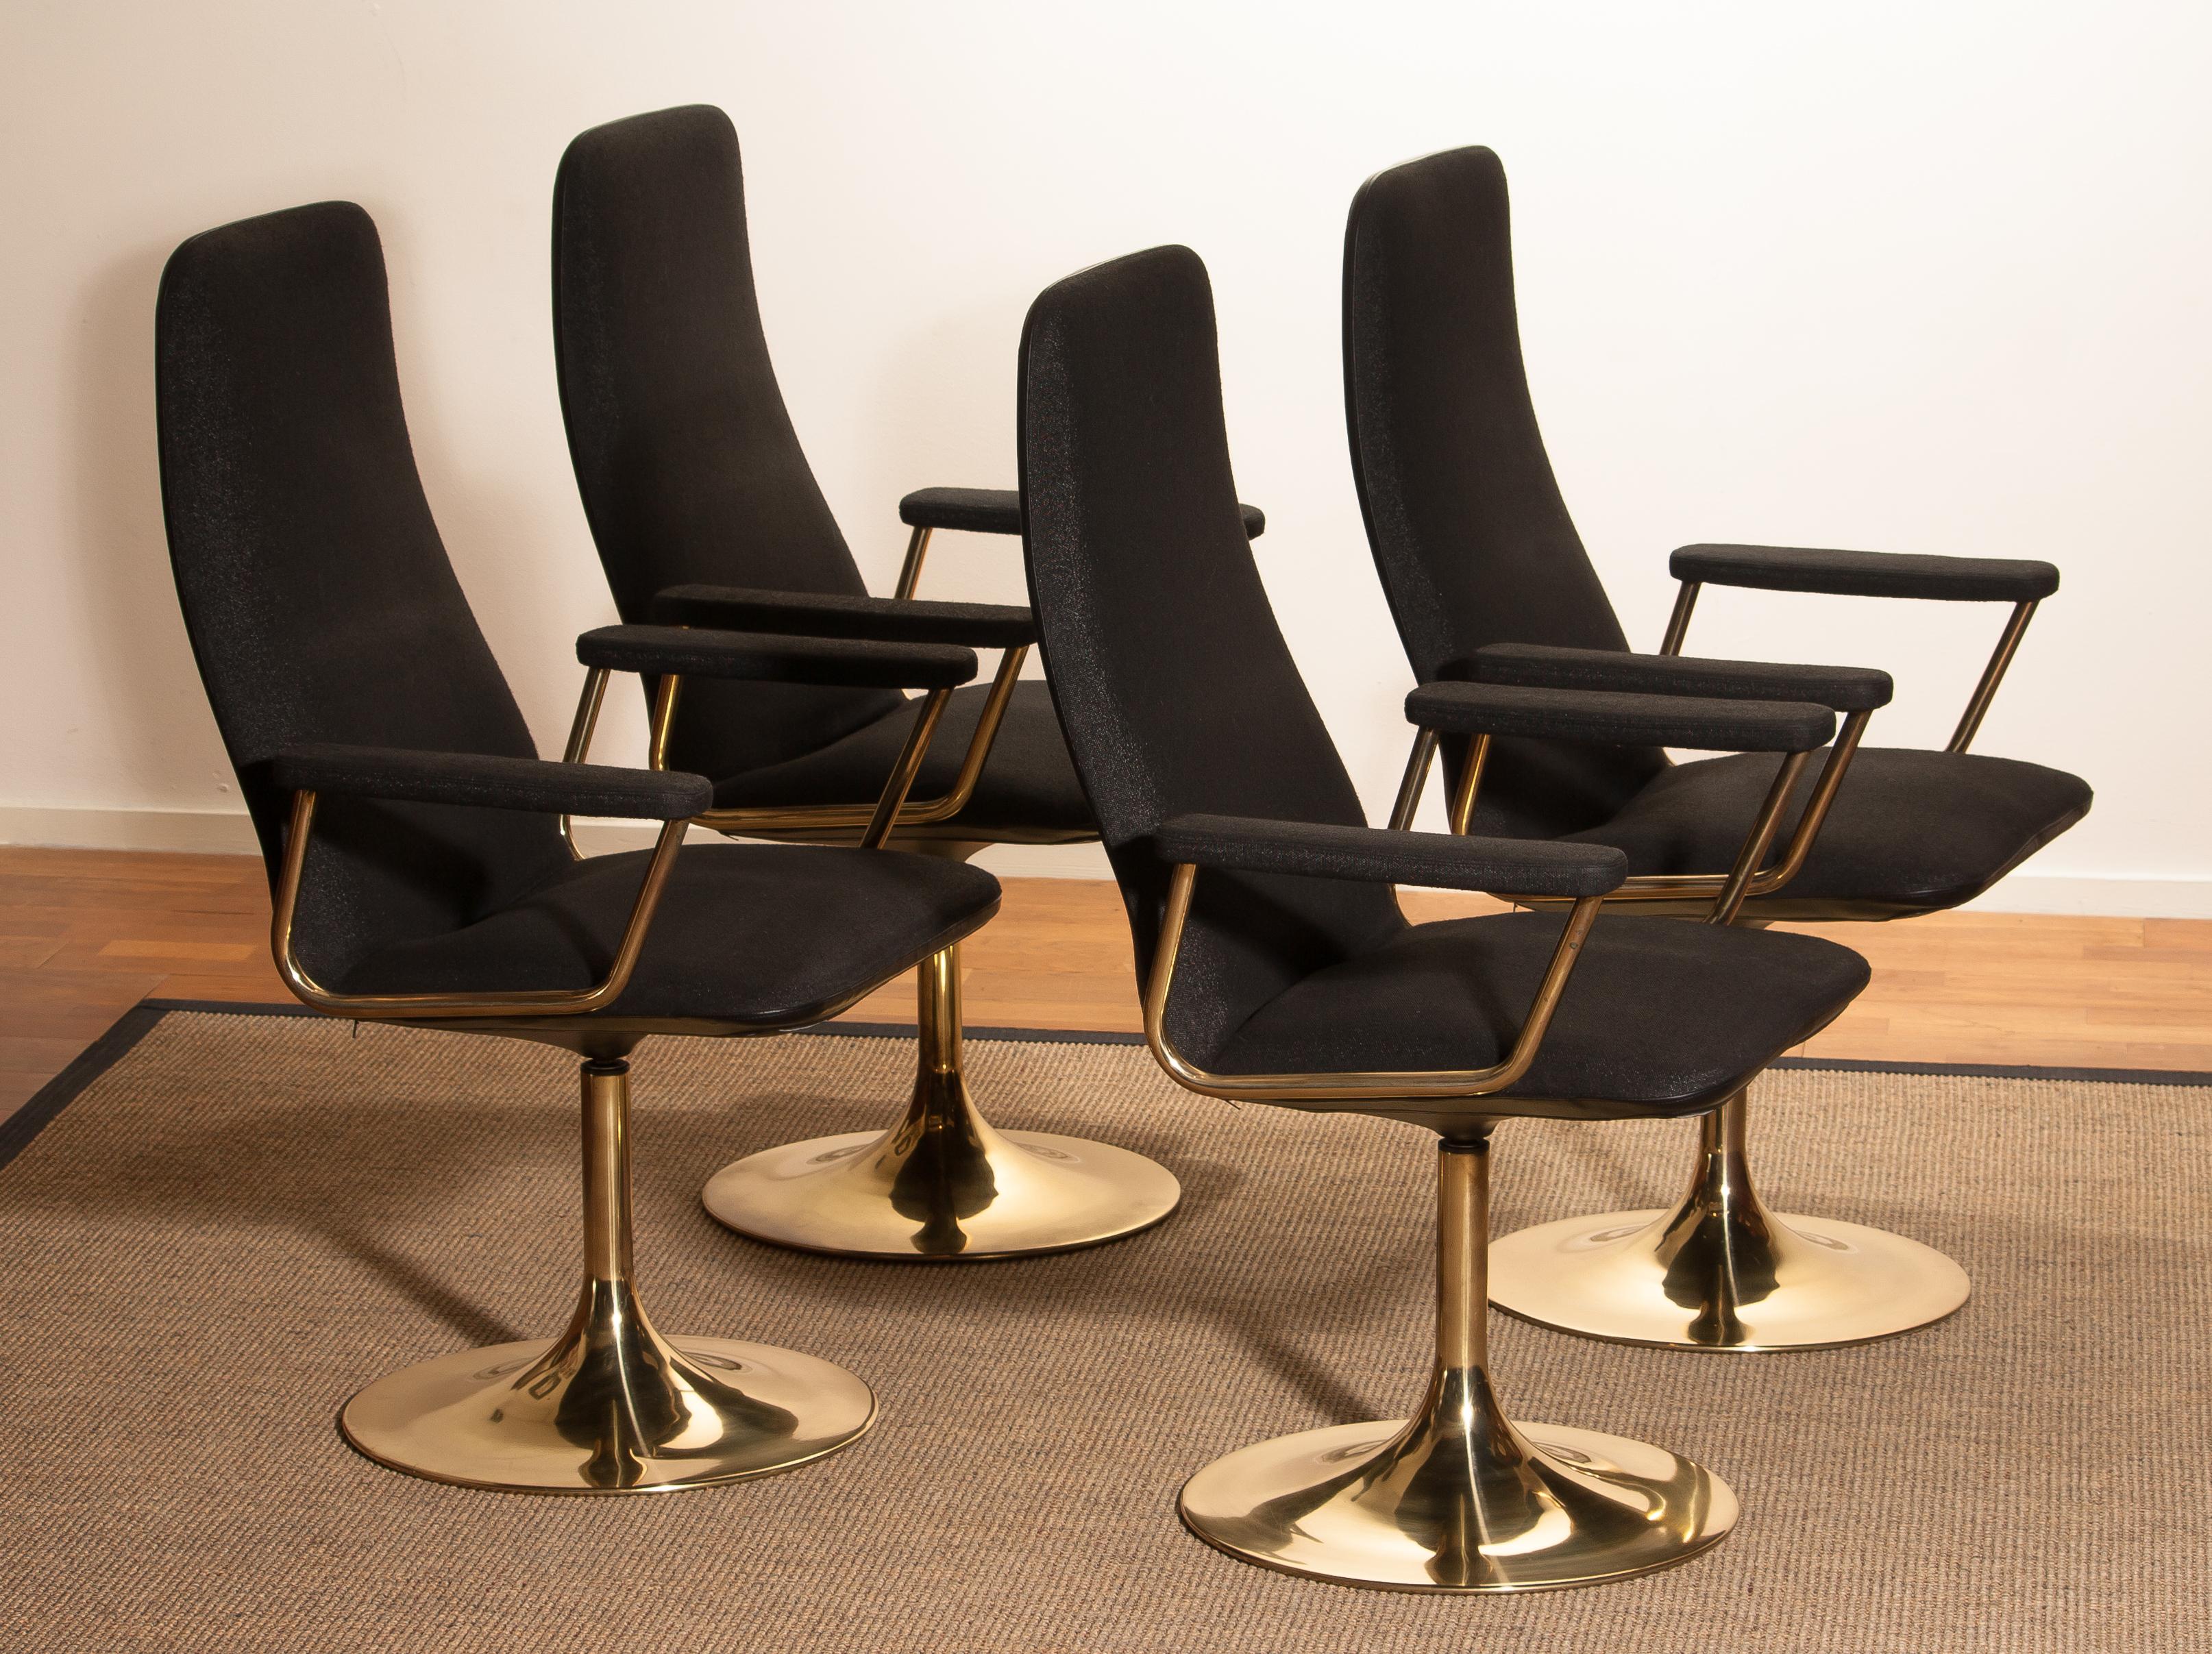 Four Golden, with Black Fabric, Armrest Swivel Chairs by Johanson Design, 1970 3